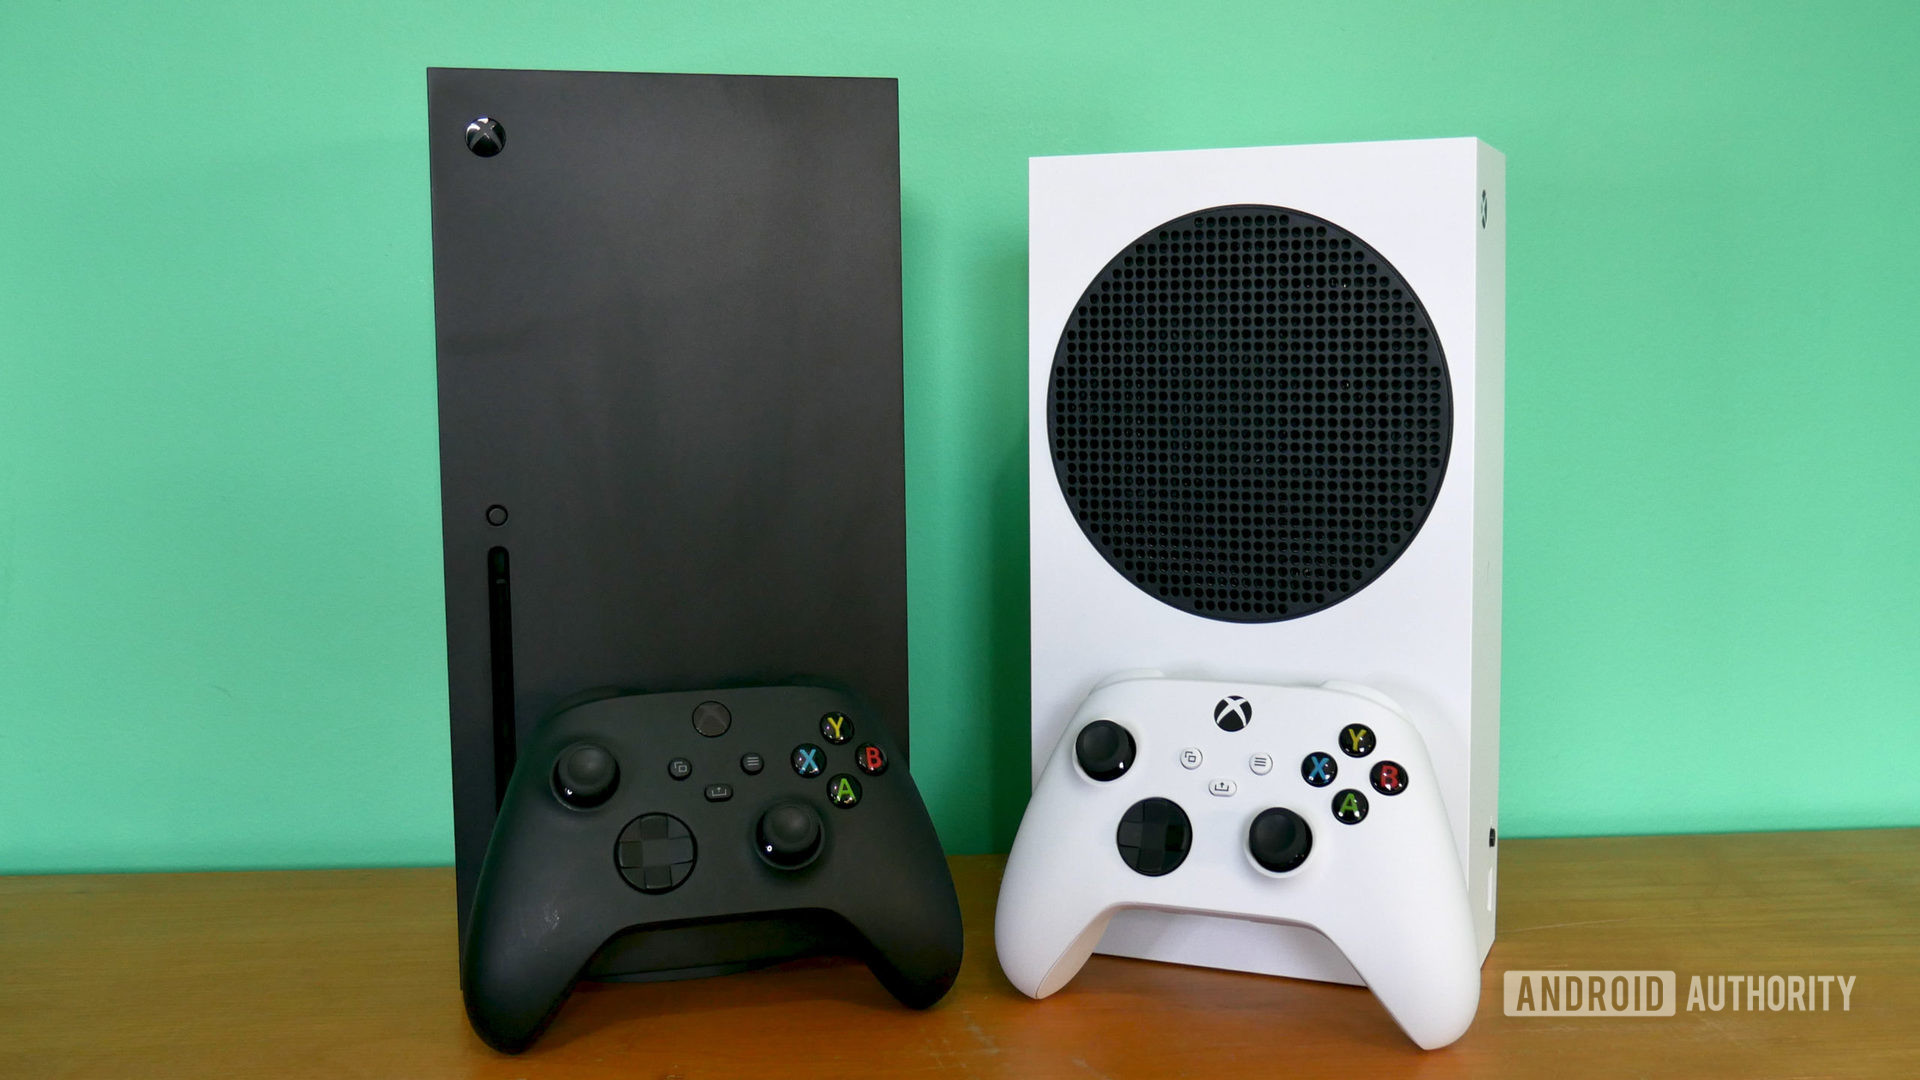 Xbox Series X and Series S review: A worthy video game console upgrade